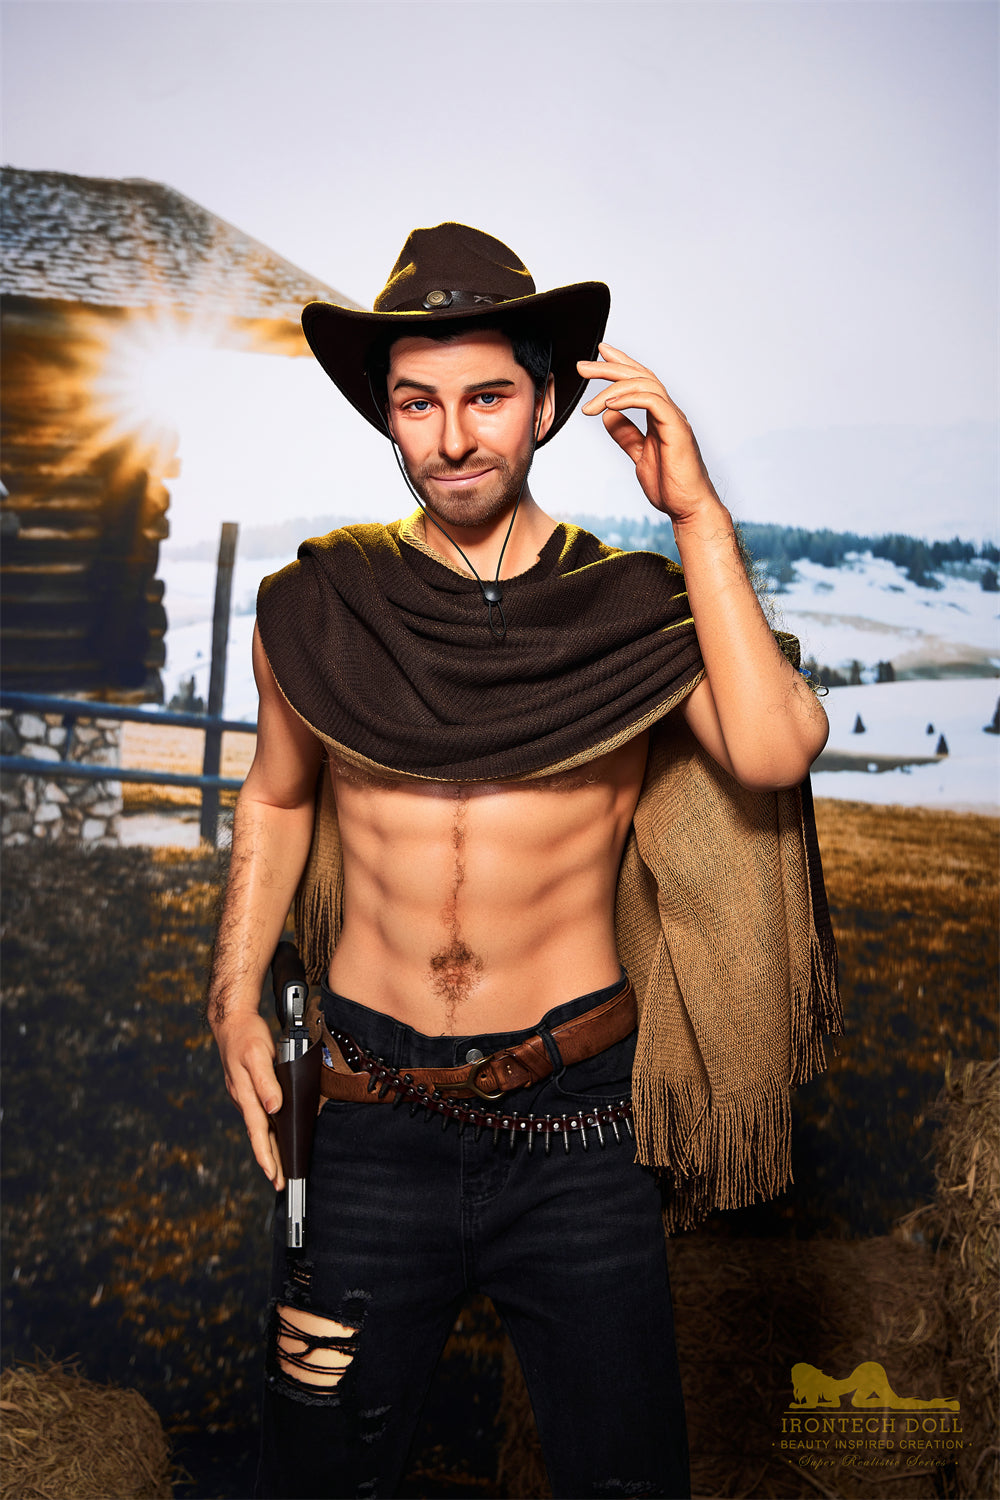 Irontech Allen 5ft58 / 170cm M6 Full Silicone Realistic Cowboy Male Hot Sex Doll